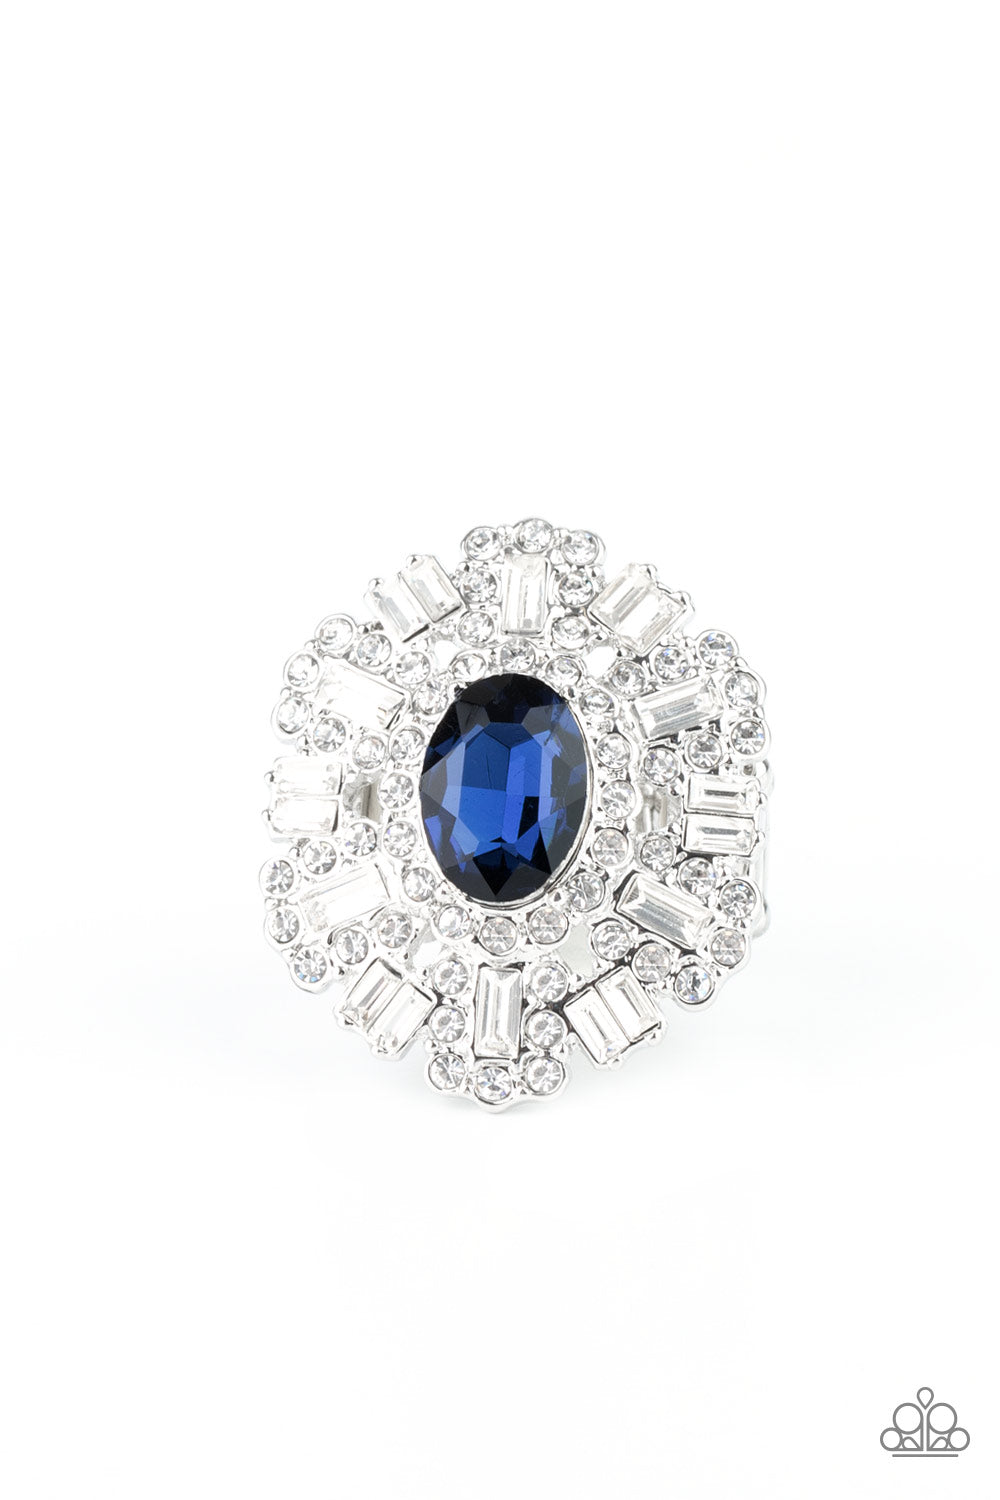 A sparkly series of round and emerald-cut rhinestone petals flare out from a blue oval rhinestone center, creating a dramatically oversized centerpiece atop the finger. Features a stretchy band for a flexible fit.